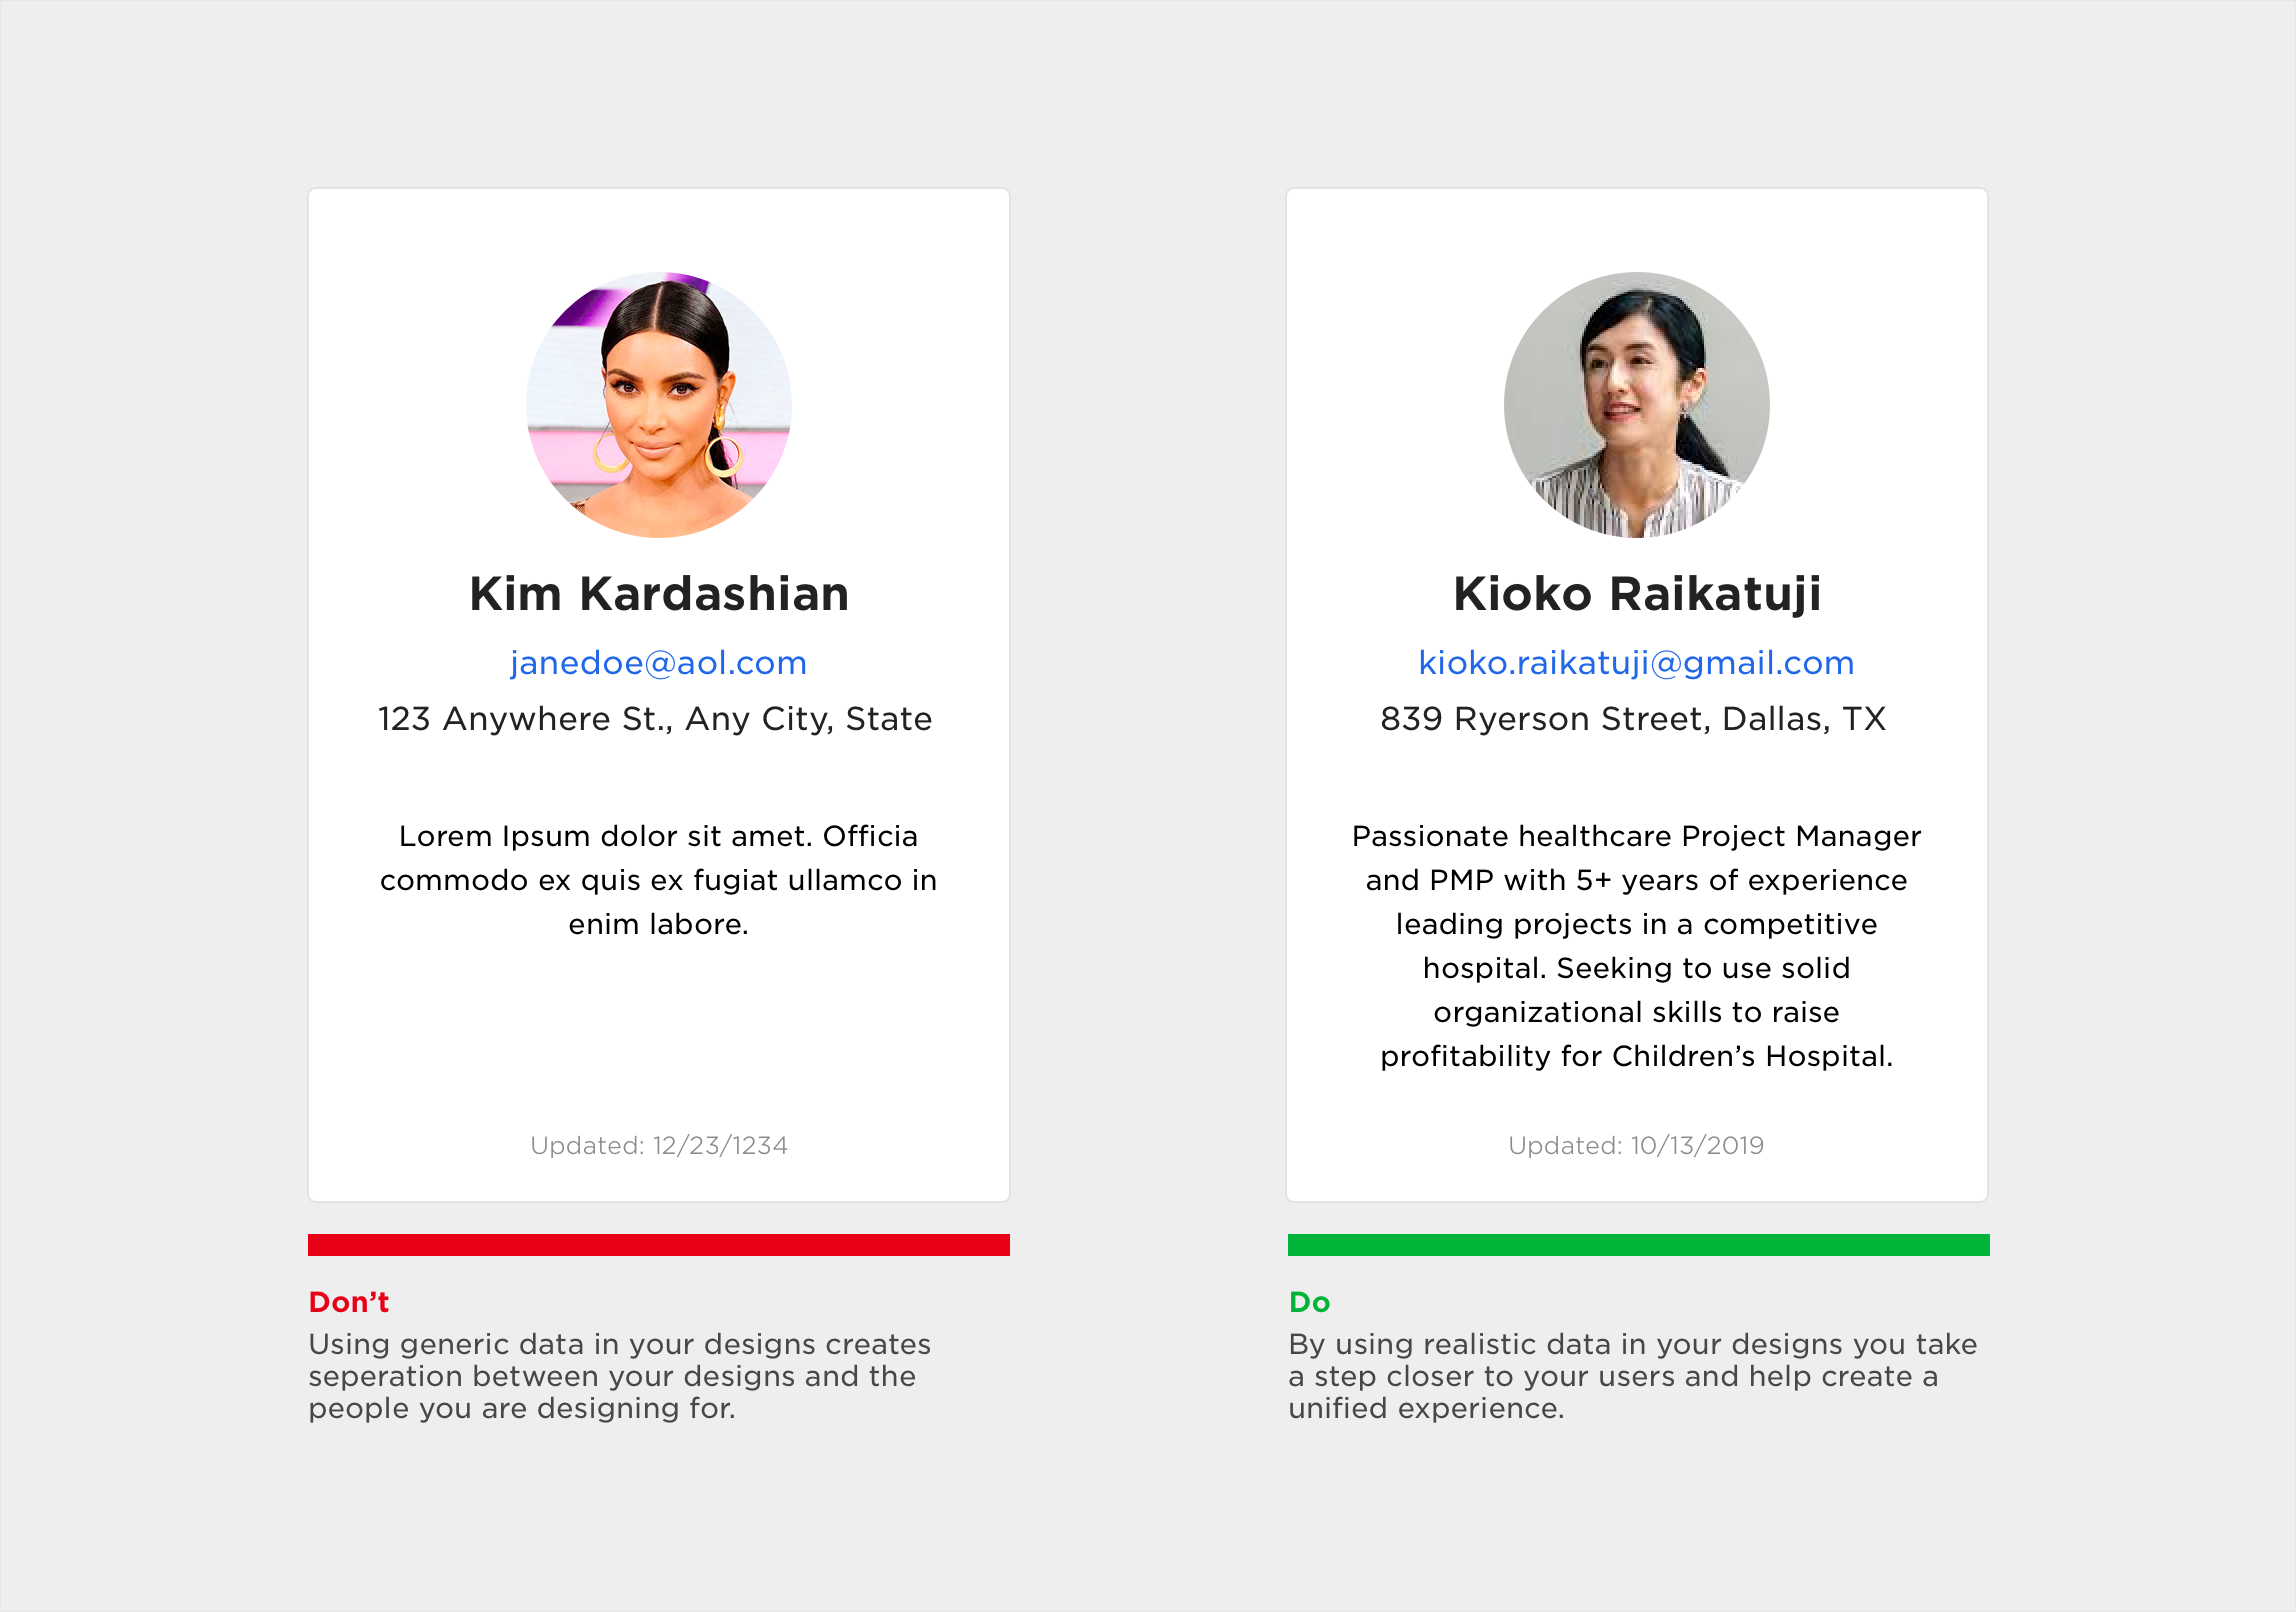 ux-design-guide-to-representing-users-profiles-2.png